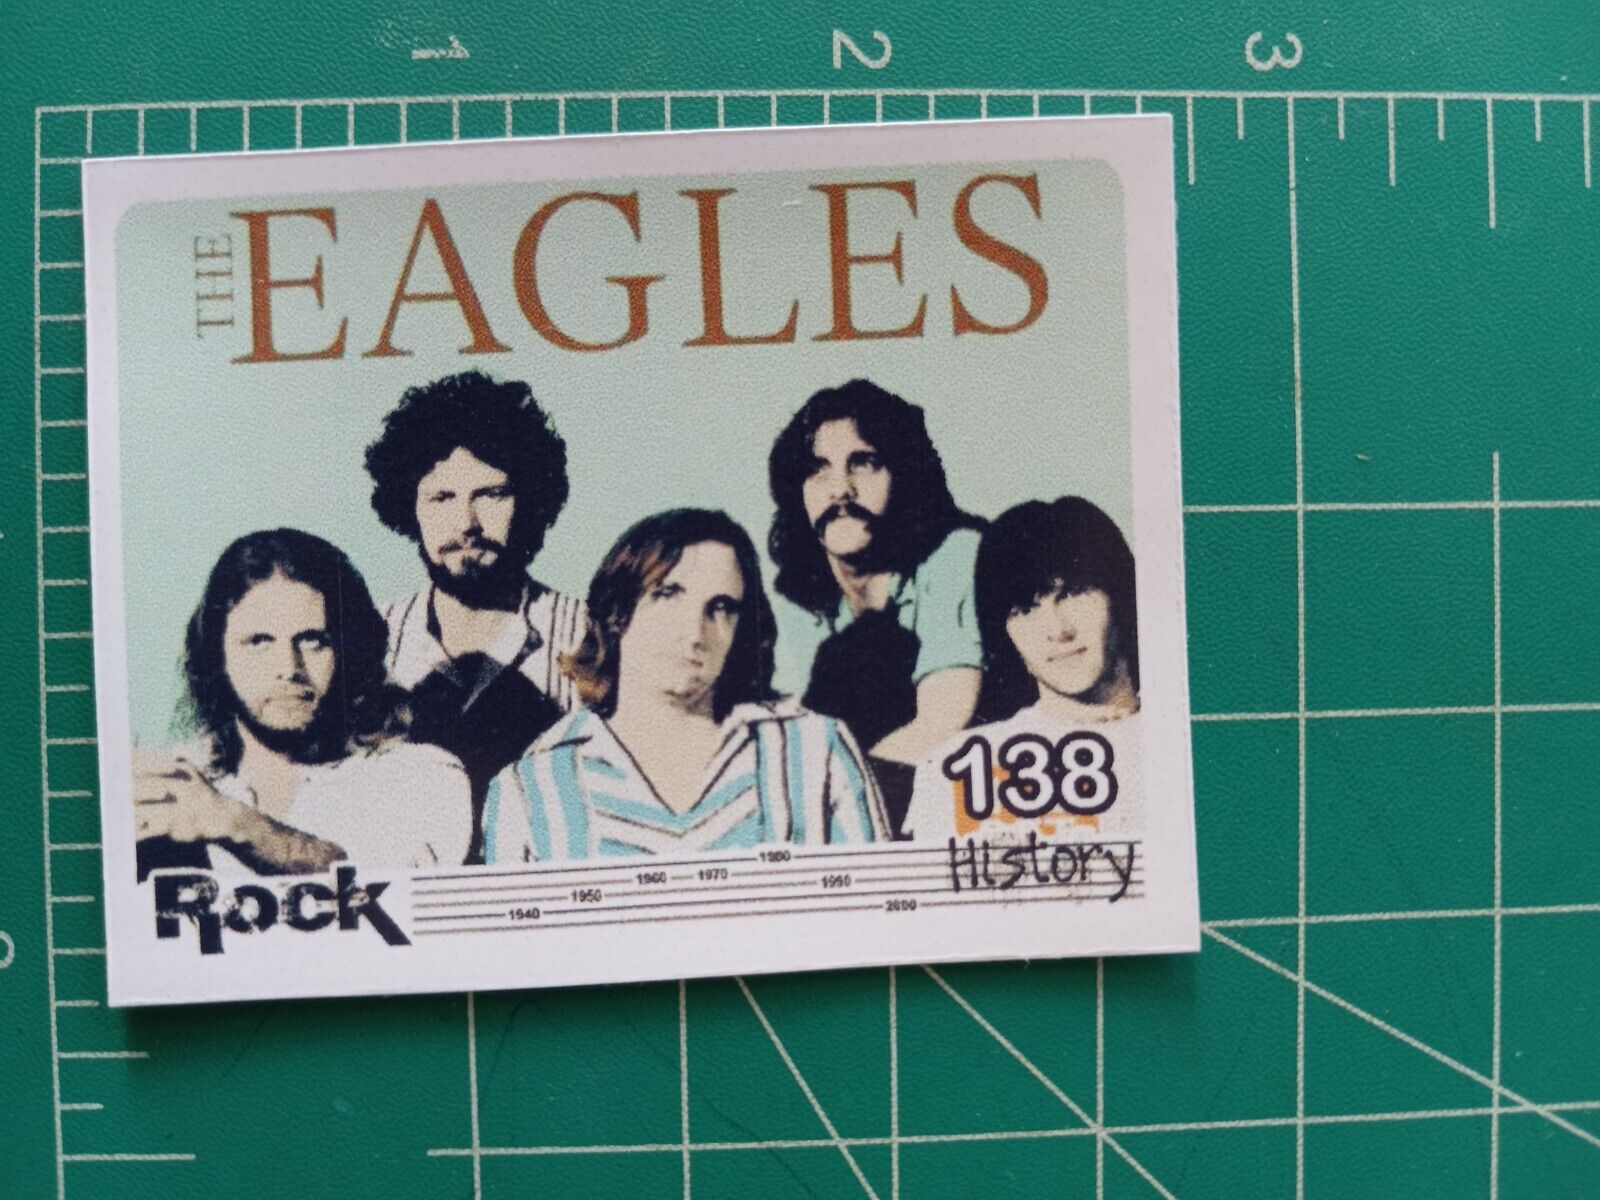 2020 ROCK HISTORY music Sticker Card Brazil THE EAGLES GROUP BAND #138